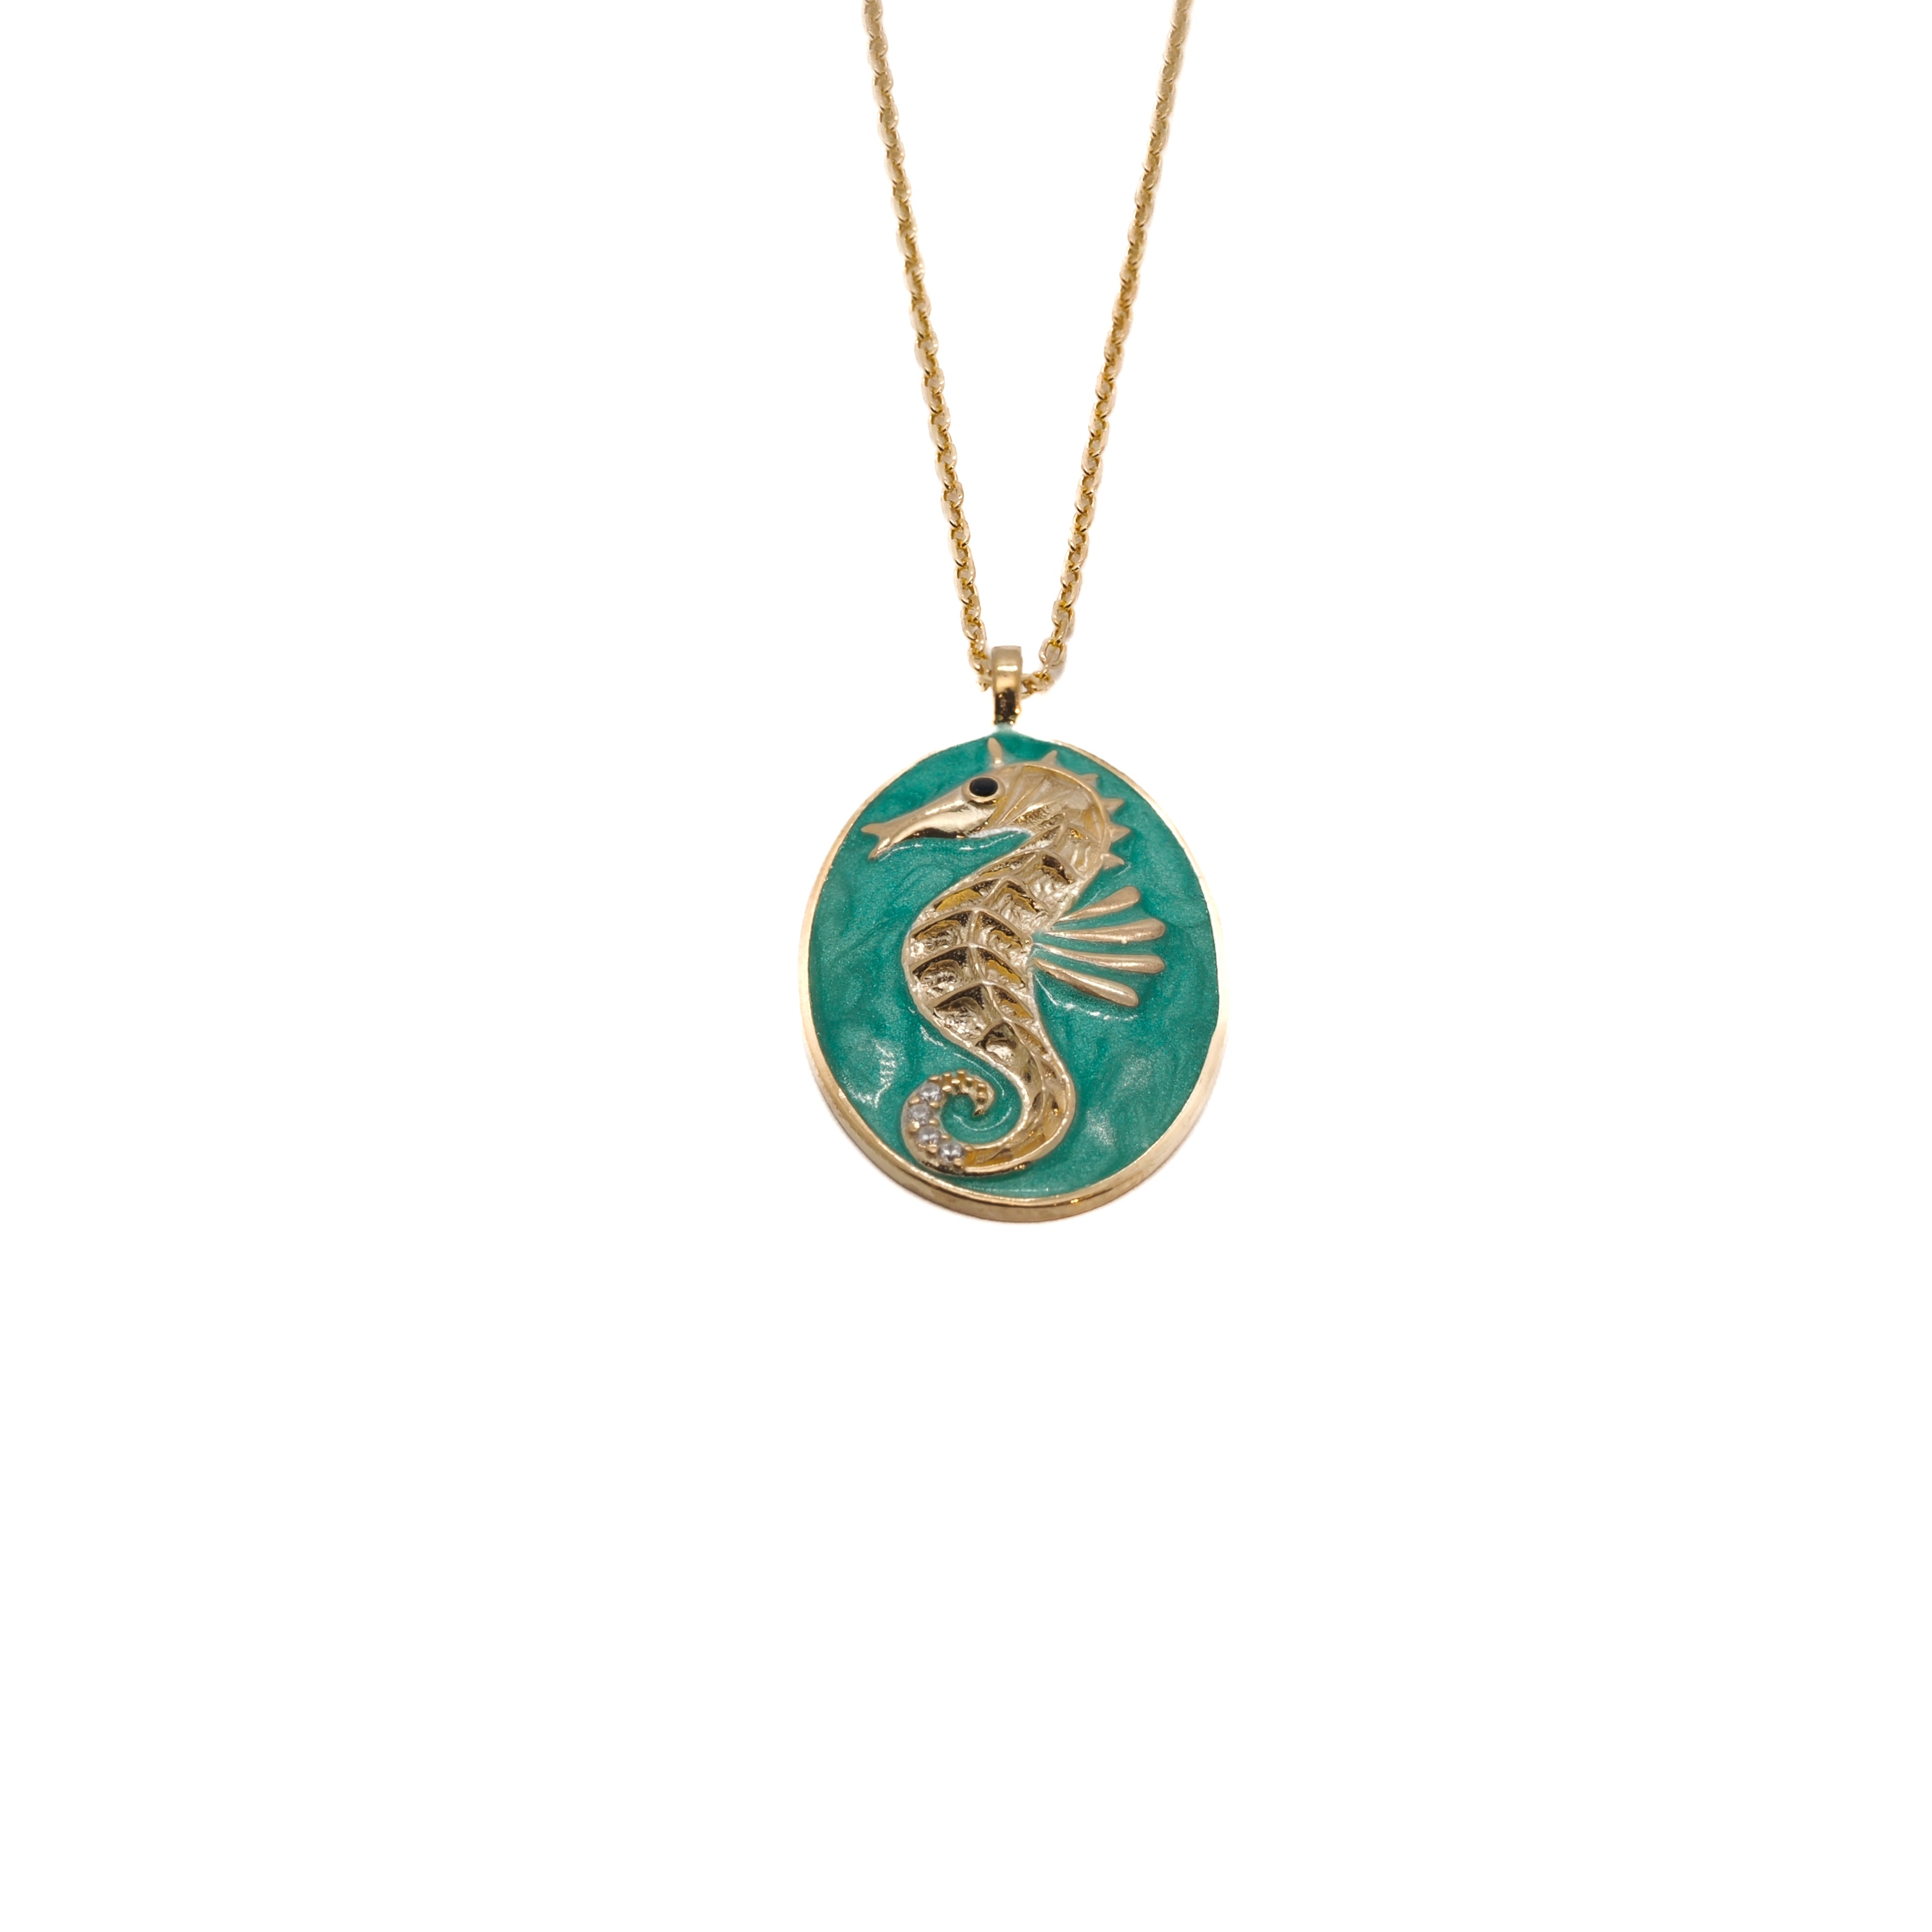 The Spirit Animal Green Seahorse Necklace, featuring an exquisite seahorse pendant in vibrant green enamel, symbolizing strength and creativity.